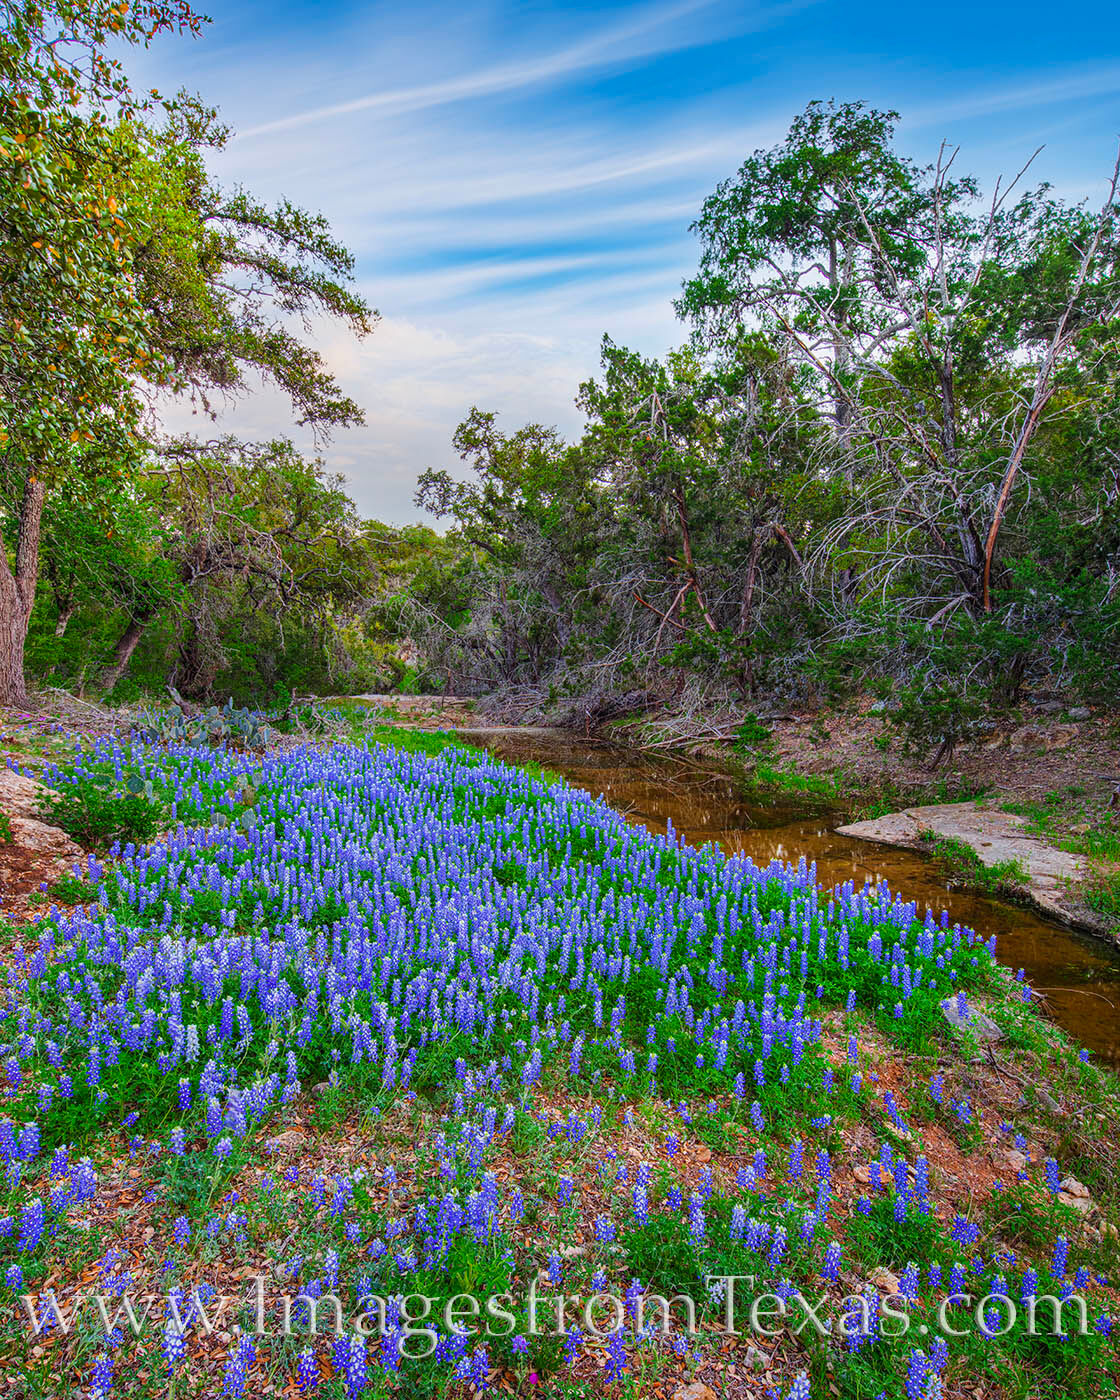 Bluebonnets cover the edge of a small creek somewhere in the Texas Hill Country.